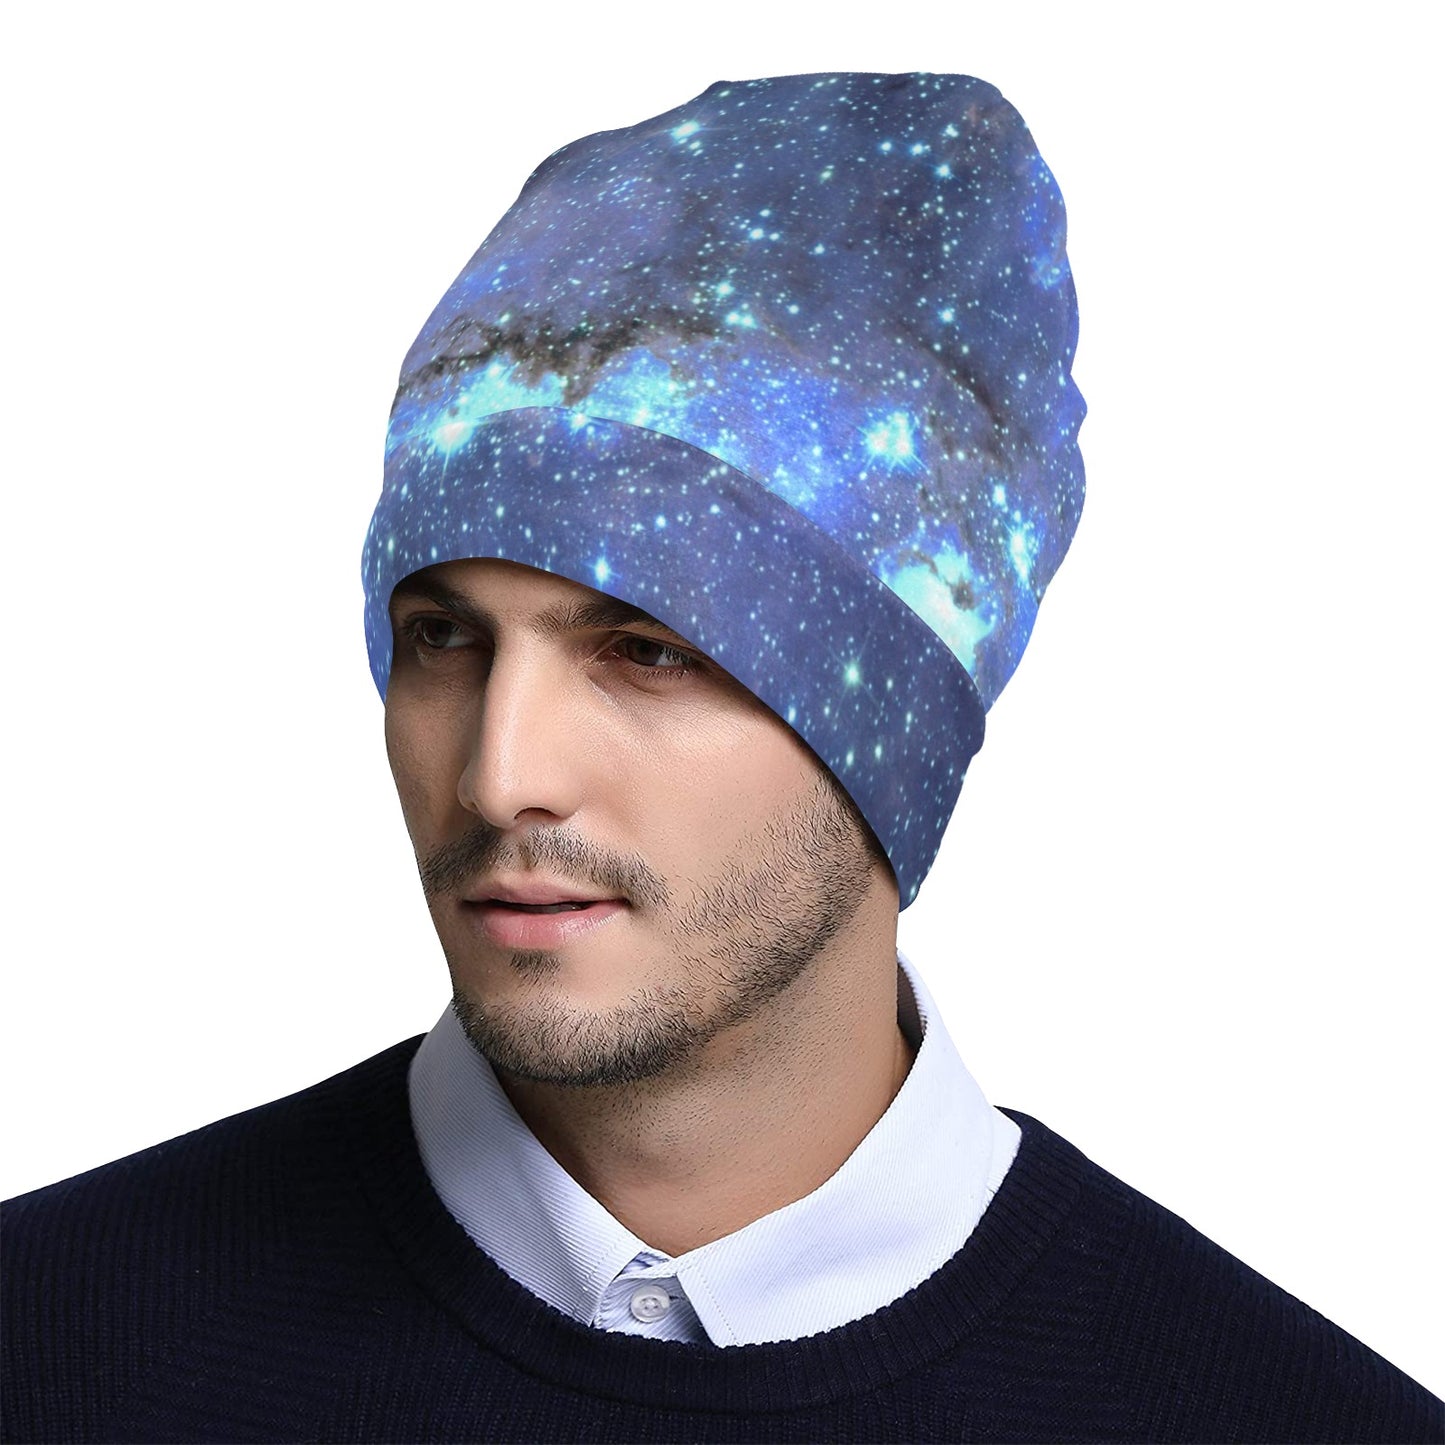 Galaxy Beanie, Blue Space Universe Stars Soft Fleece Party Men Women Cute Stretchy Winter Adult Aesthetic Designer Cap Hat Gift